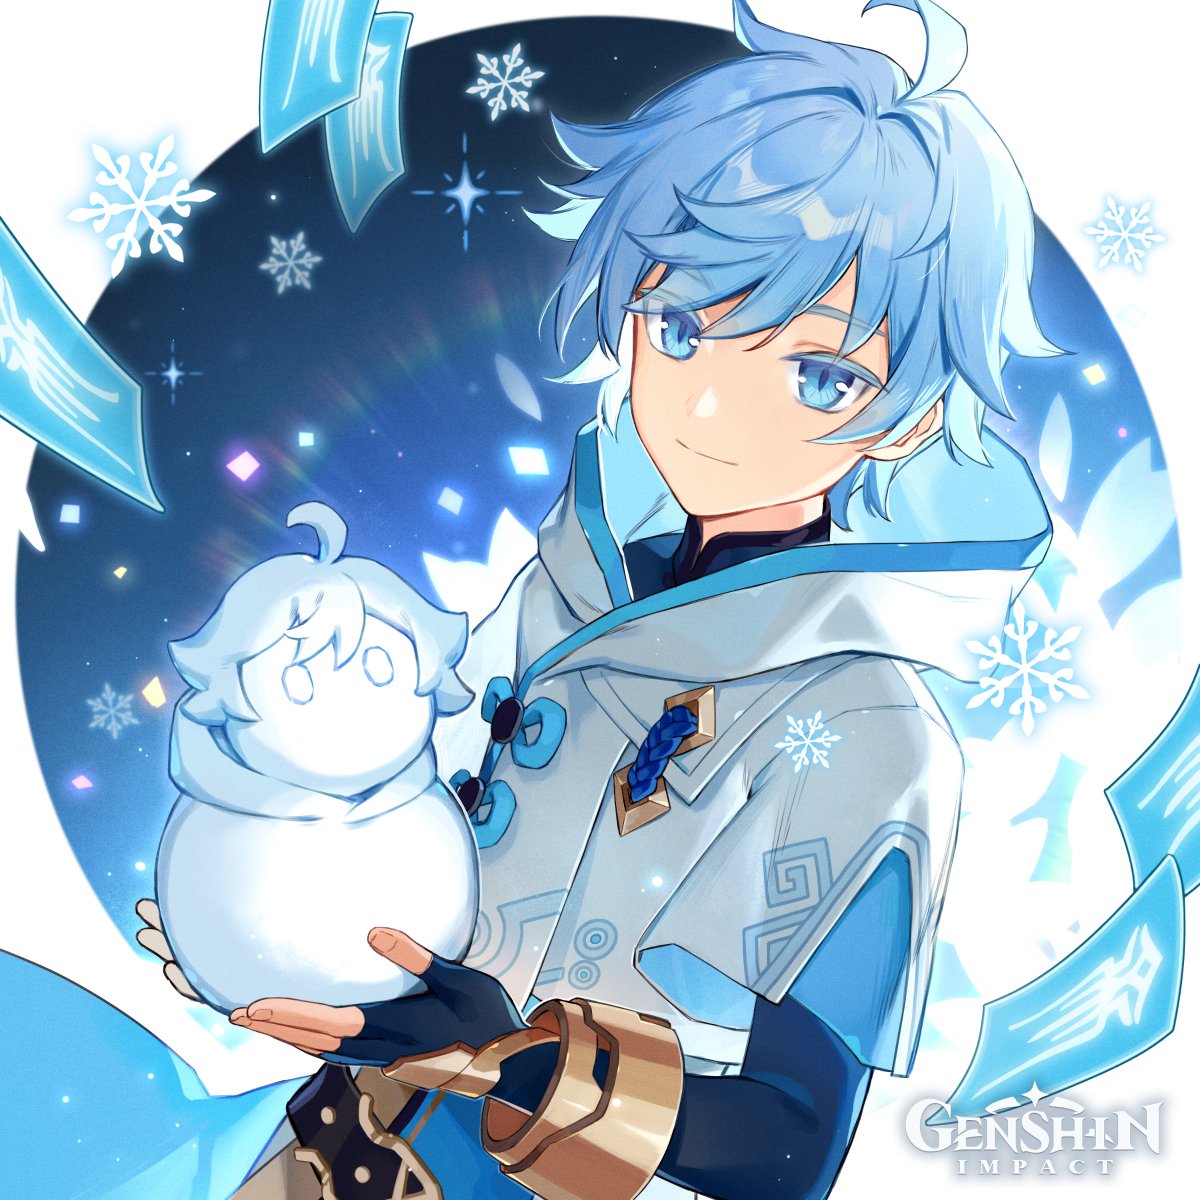 Thanks for sparring with me today, your martial arts are very different from what we learn as exorcists. I've learnt a lot!
Oh, did you make this snowman just for me?
It's cool and soothing to the touch, thank you!
I hope it doesn't melt away too soon...

#GenshinImpact